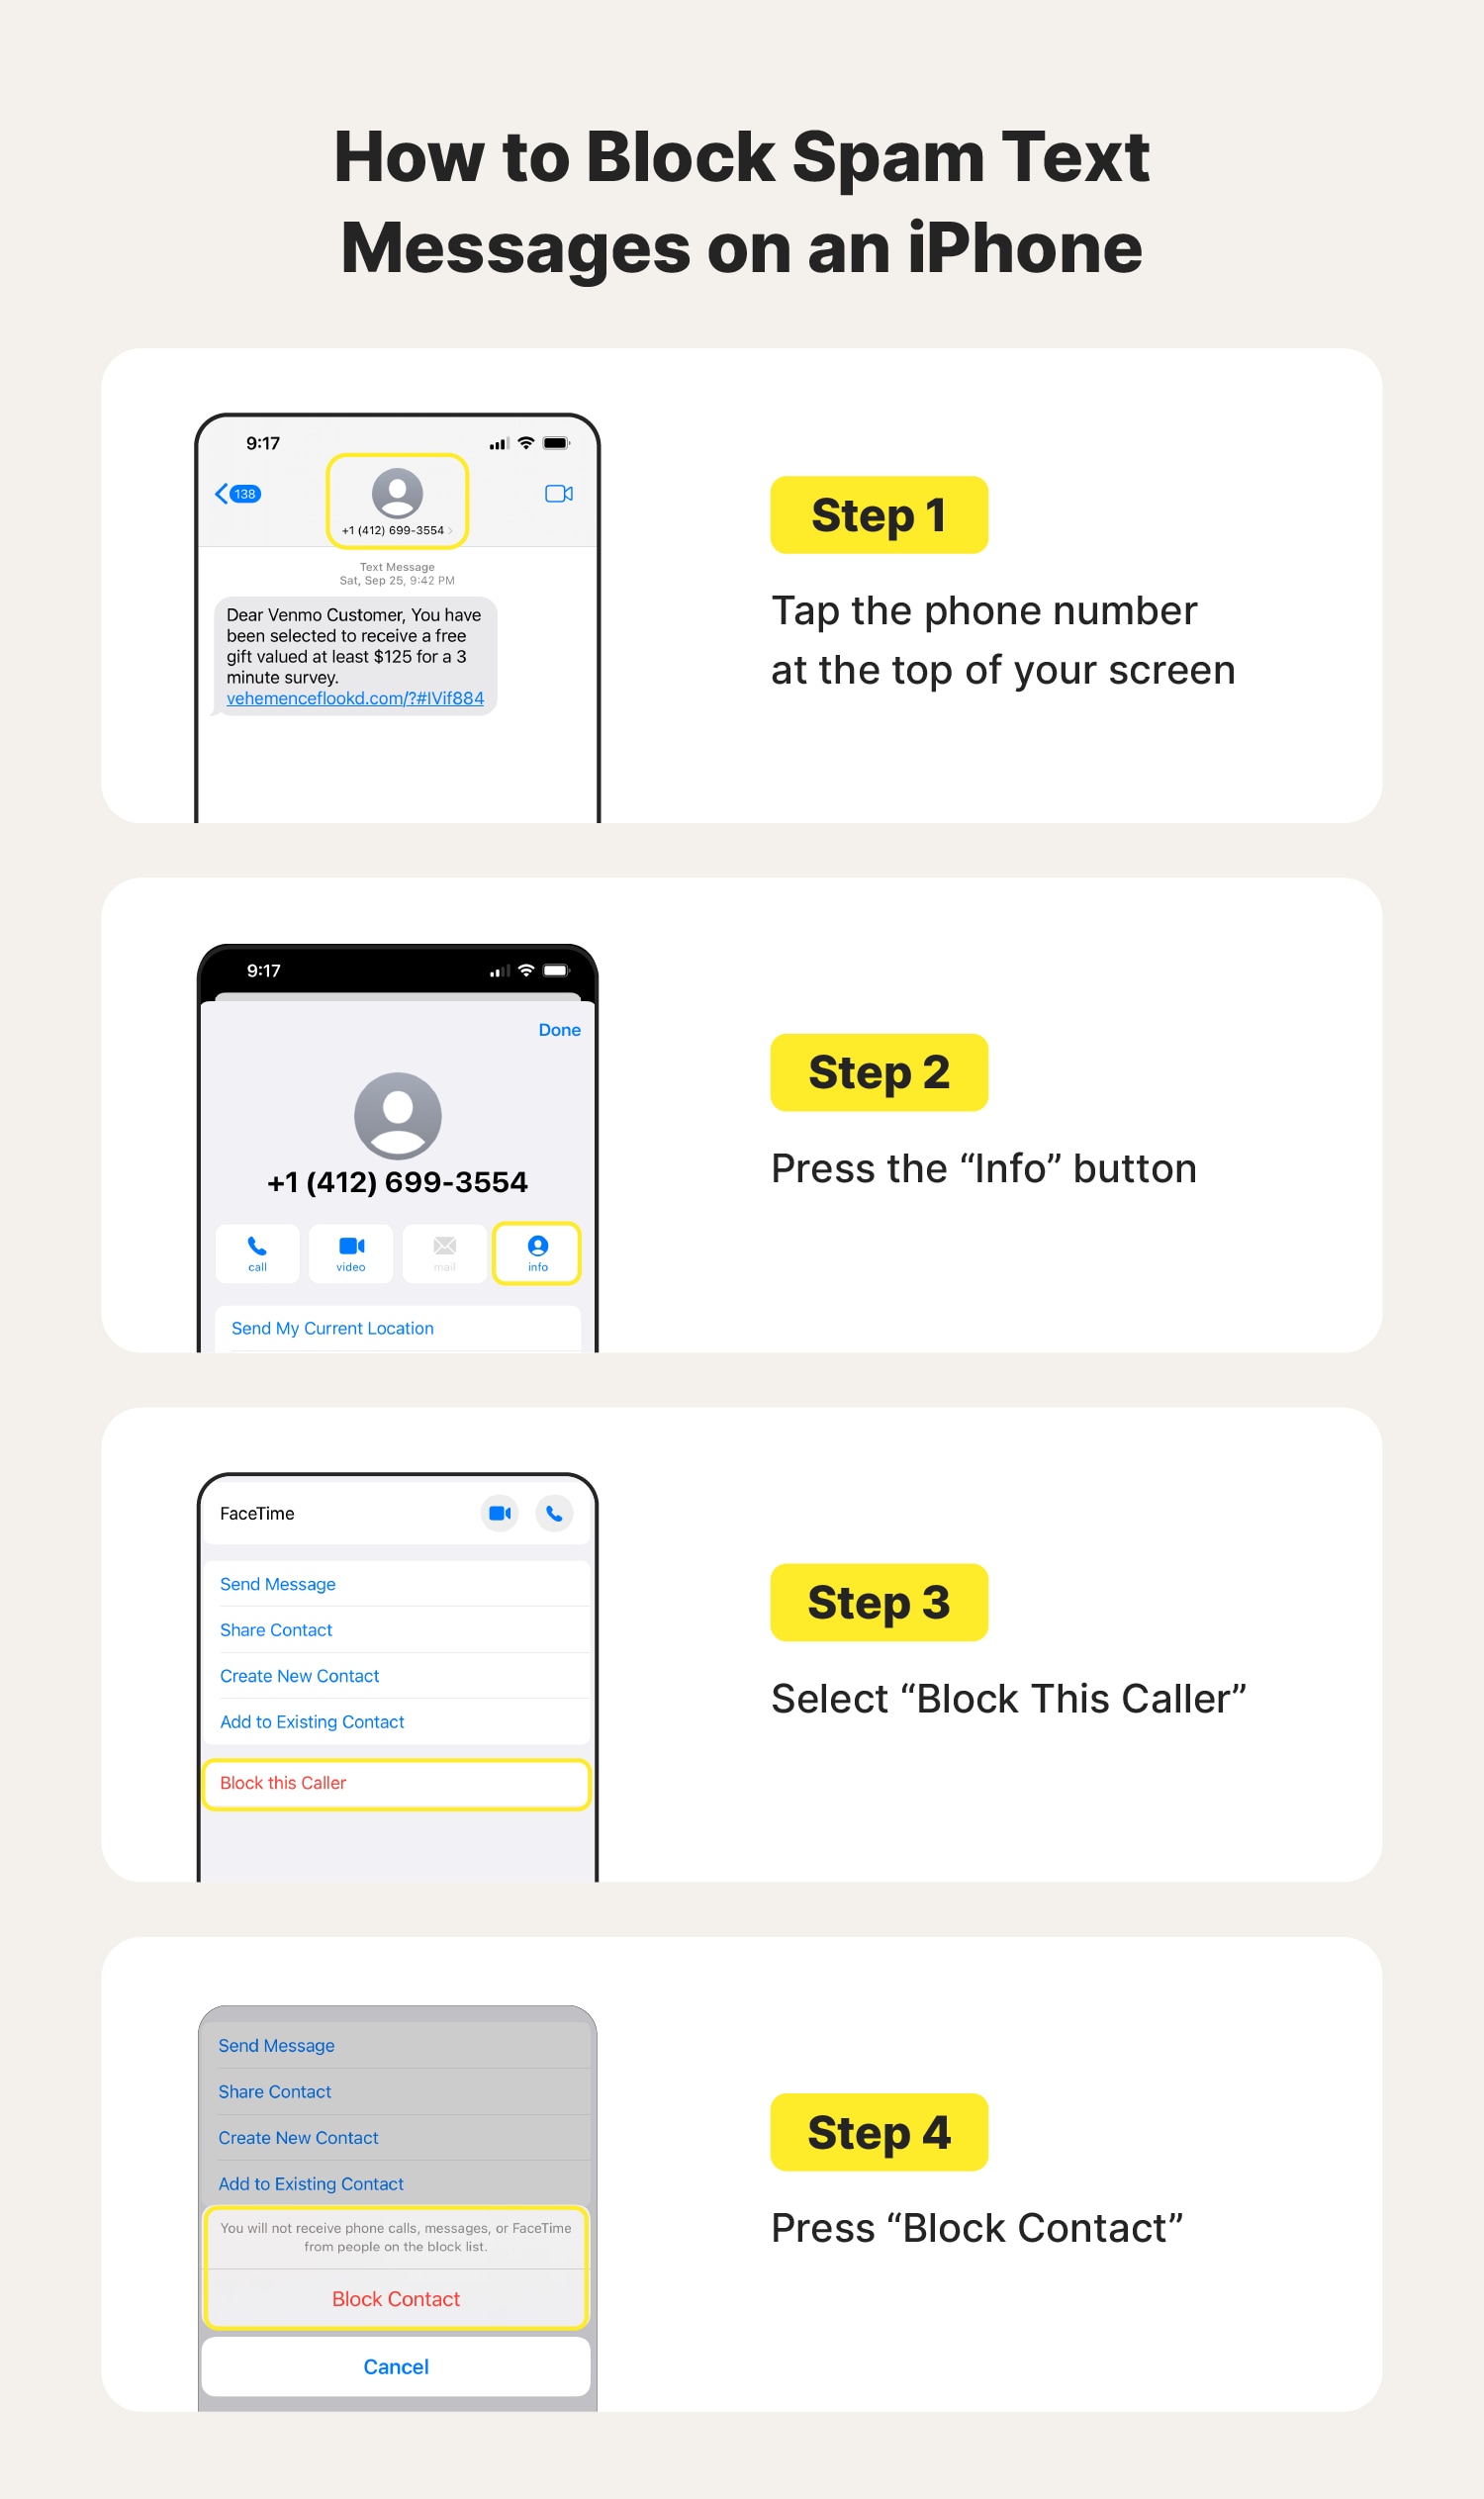 Step-by-step visual instructions on how to block spam texts on an iPhone.